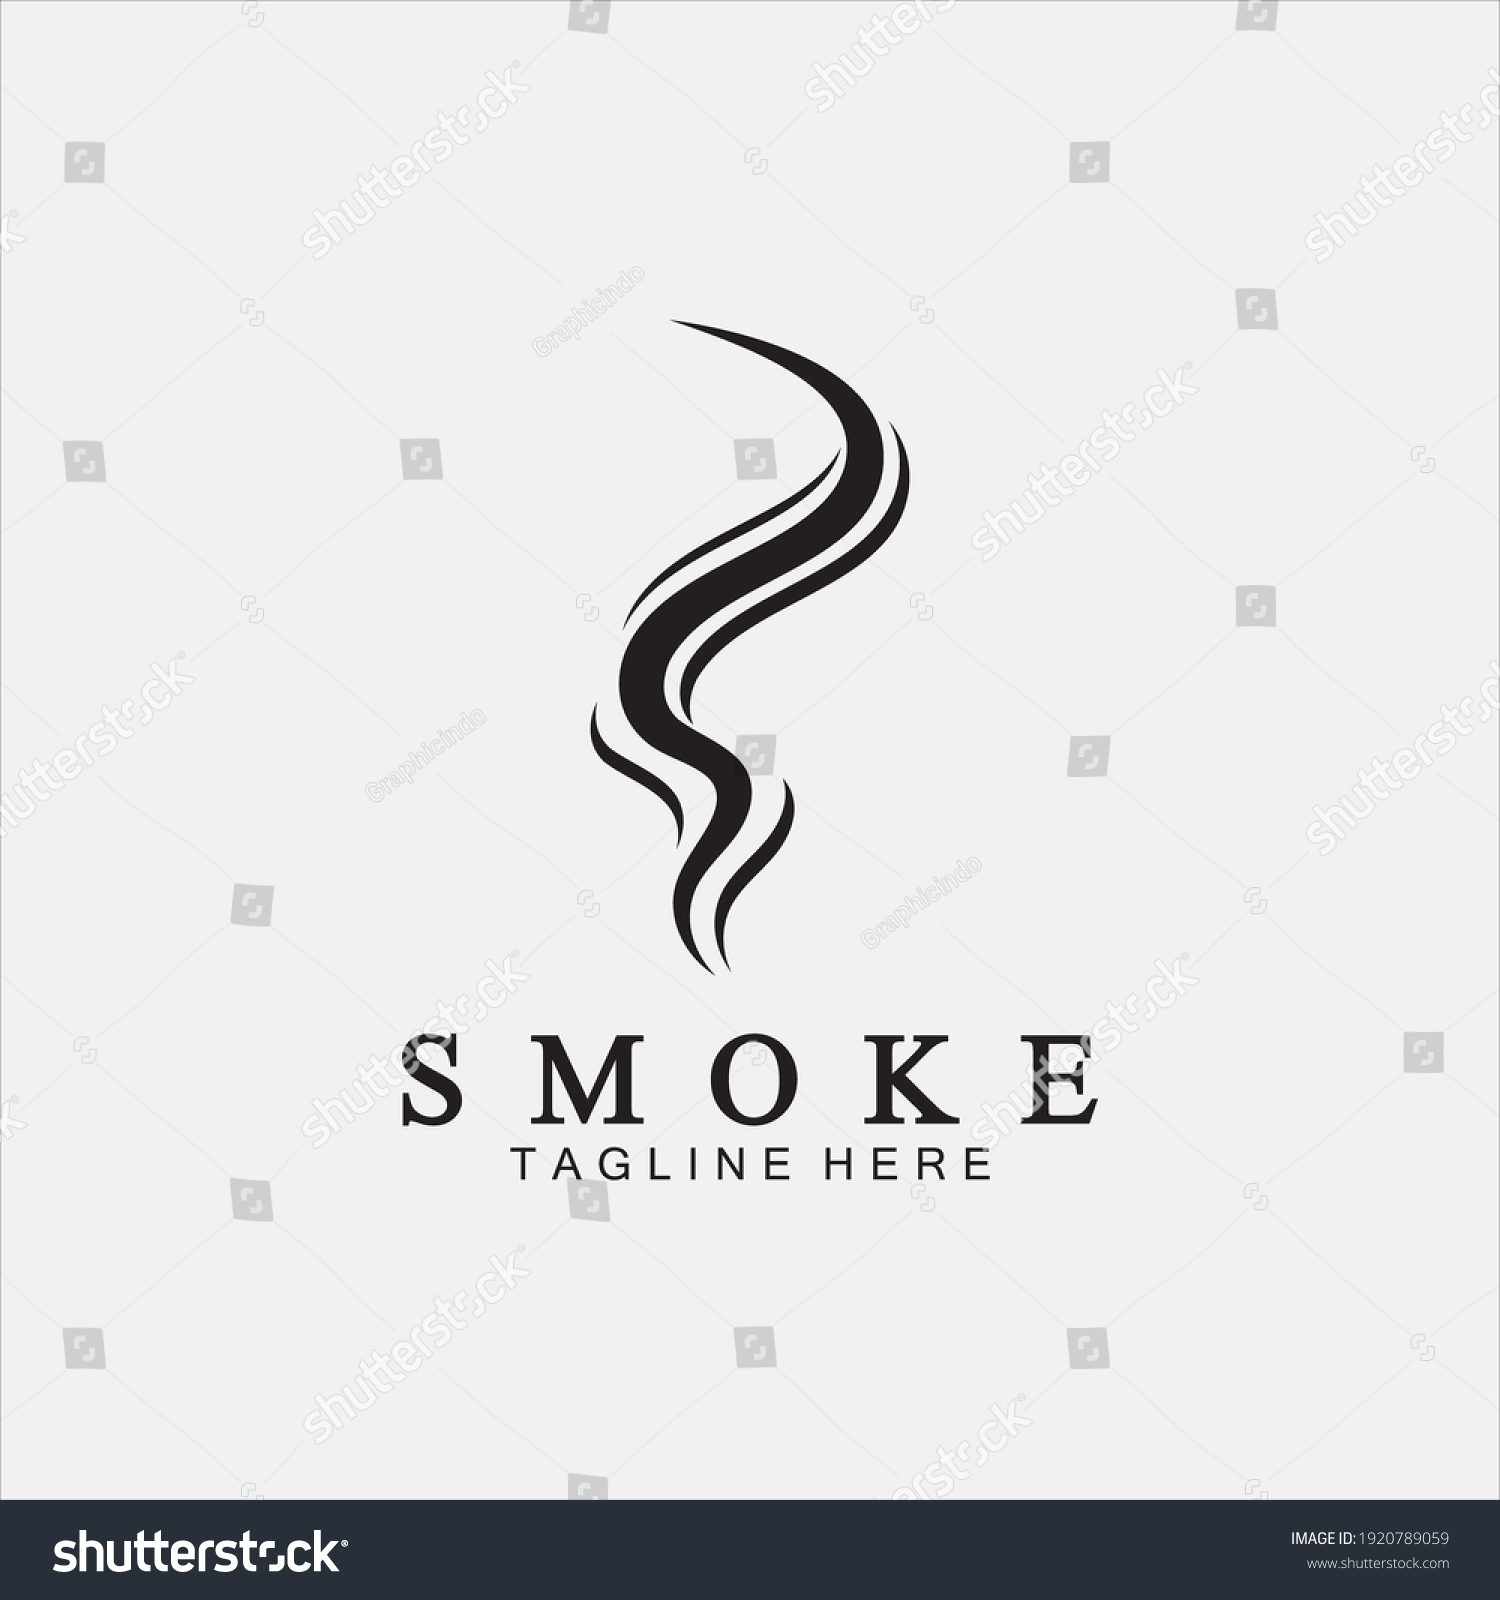 Smoke steam icon logo illustration isolated on white background,Aroma vaporize icons. Smells vector line icon, hot aroma, stink or cooking steam symbols, smelling or vapor #1920789059